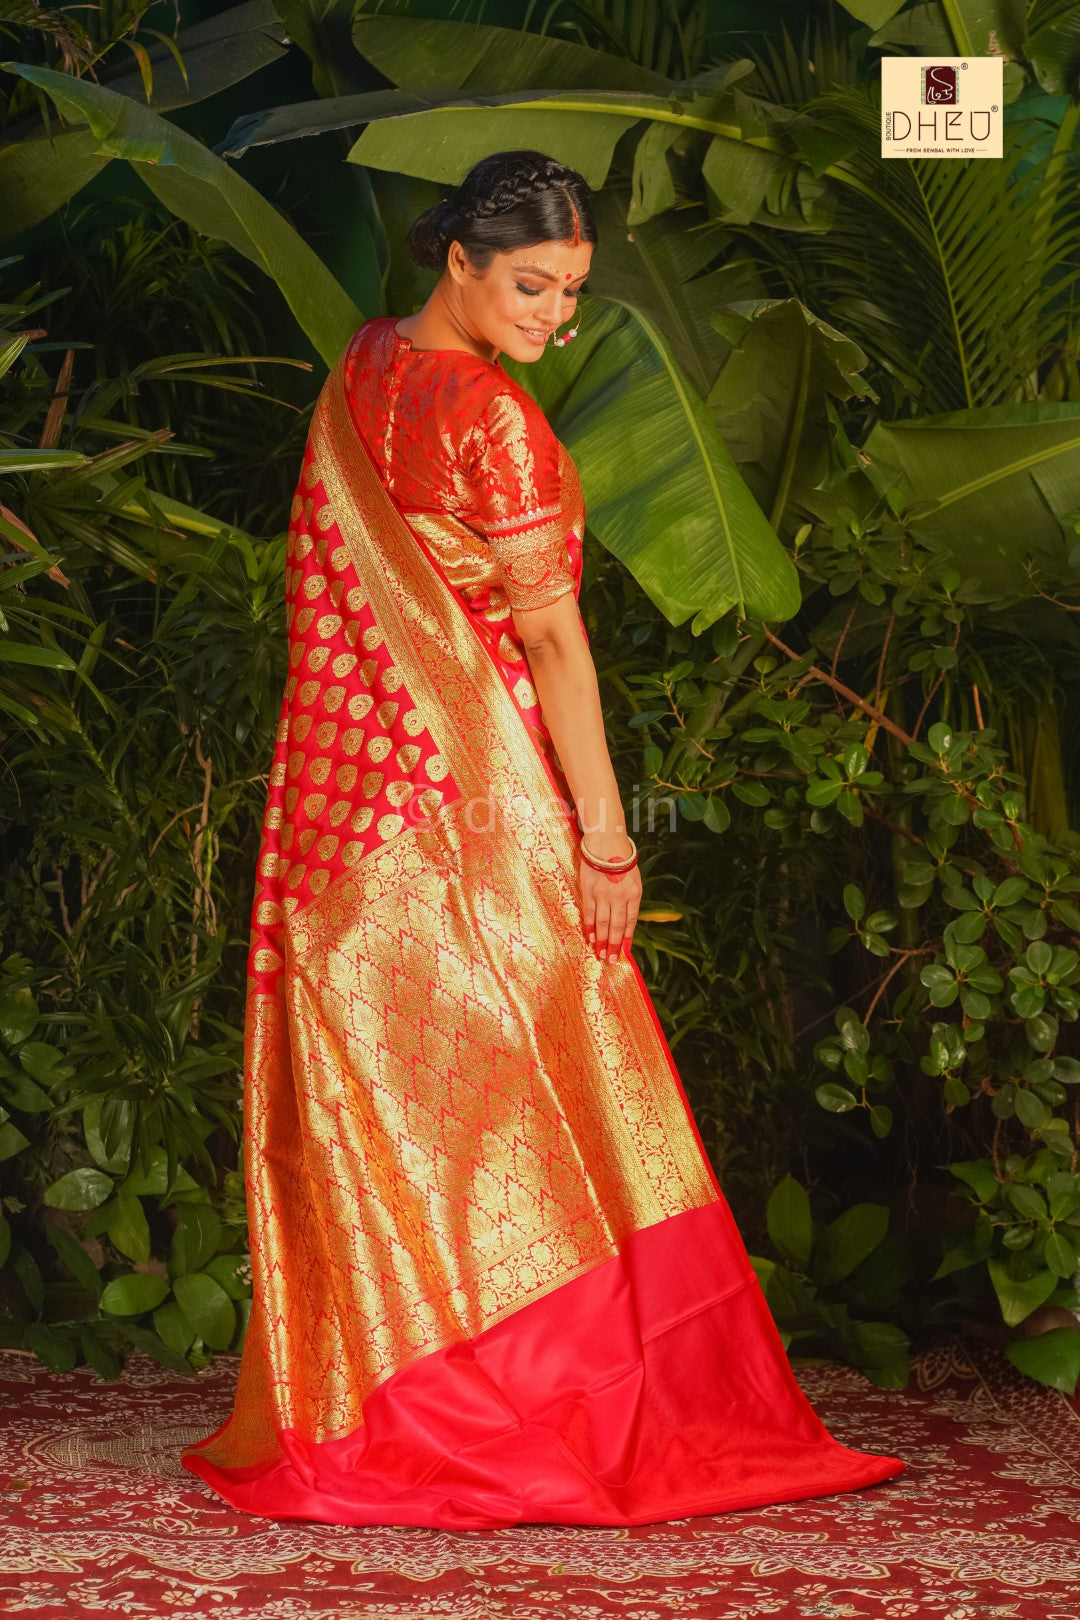 Milan Design - @milandesignkochi presents the Chilli red kanchivaram saree  with #pearlish photograph handwoven the pallu using 10 different coloured  threads. It took over a month to finish, yet creating a statement